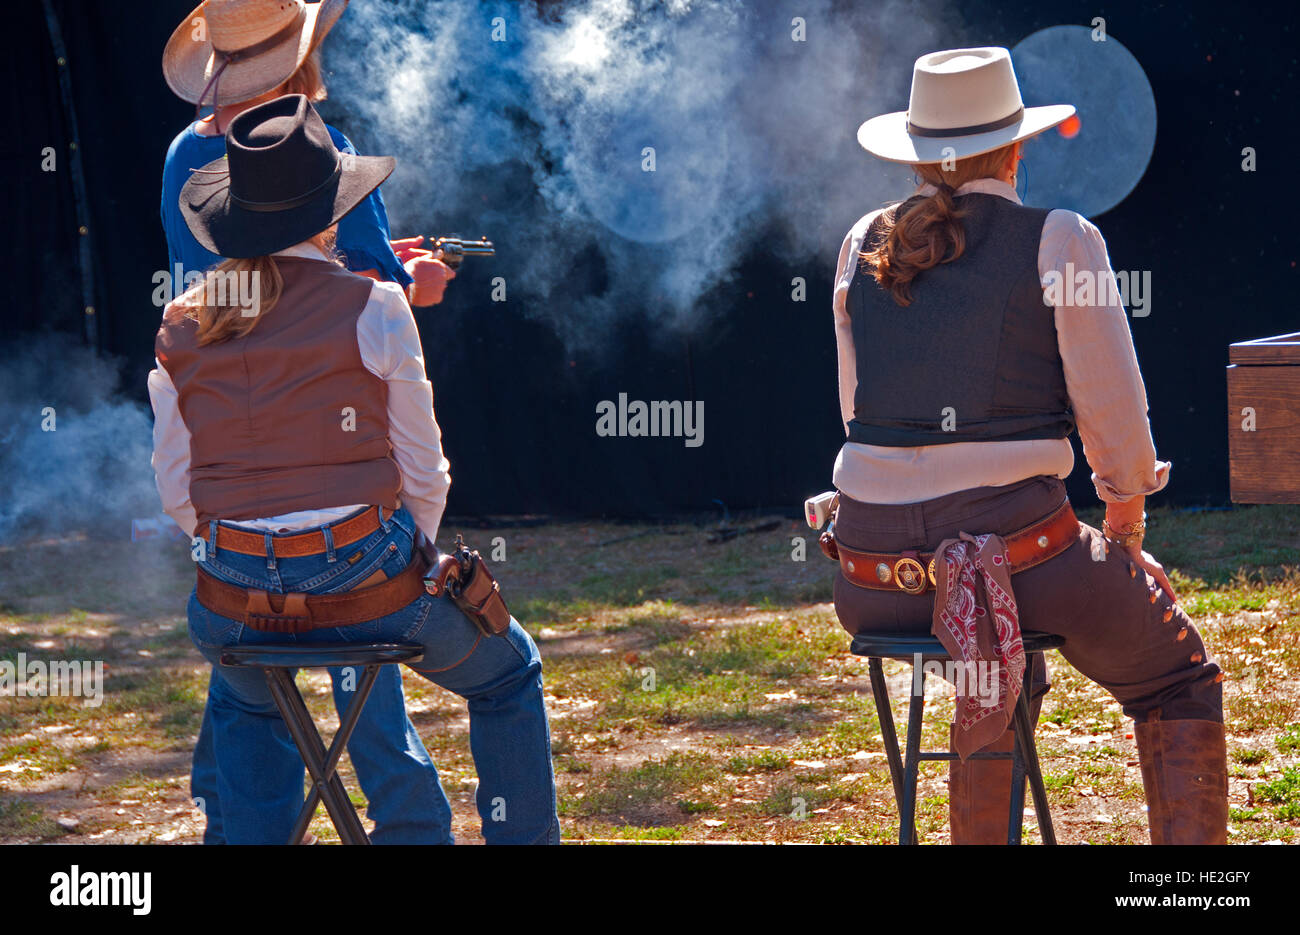 Competition at the Fastest Gun Alive World Championship Cowboy Fast Draw Competition in Fallon, Nevada Stock Photo